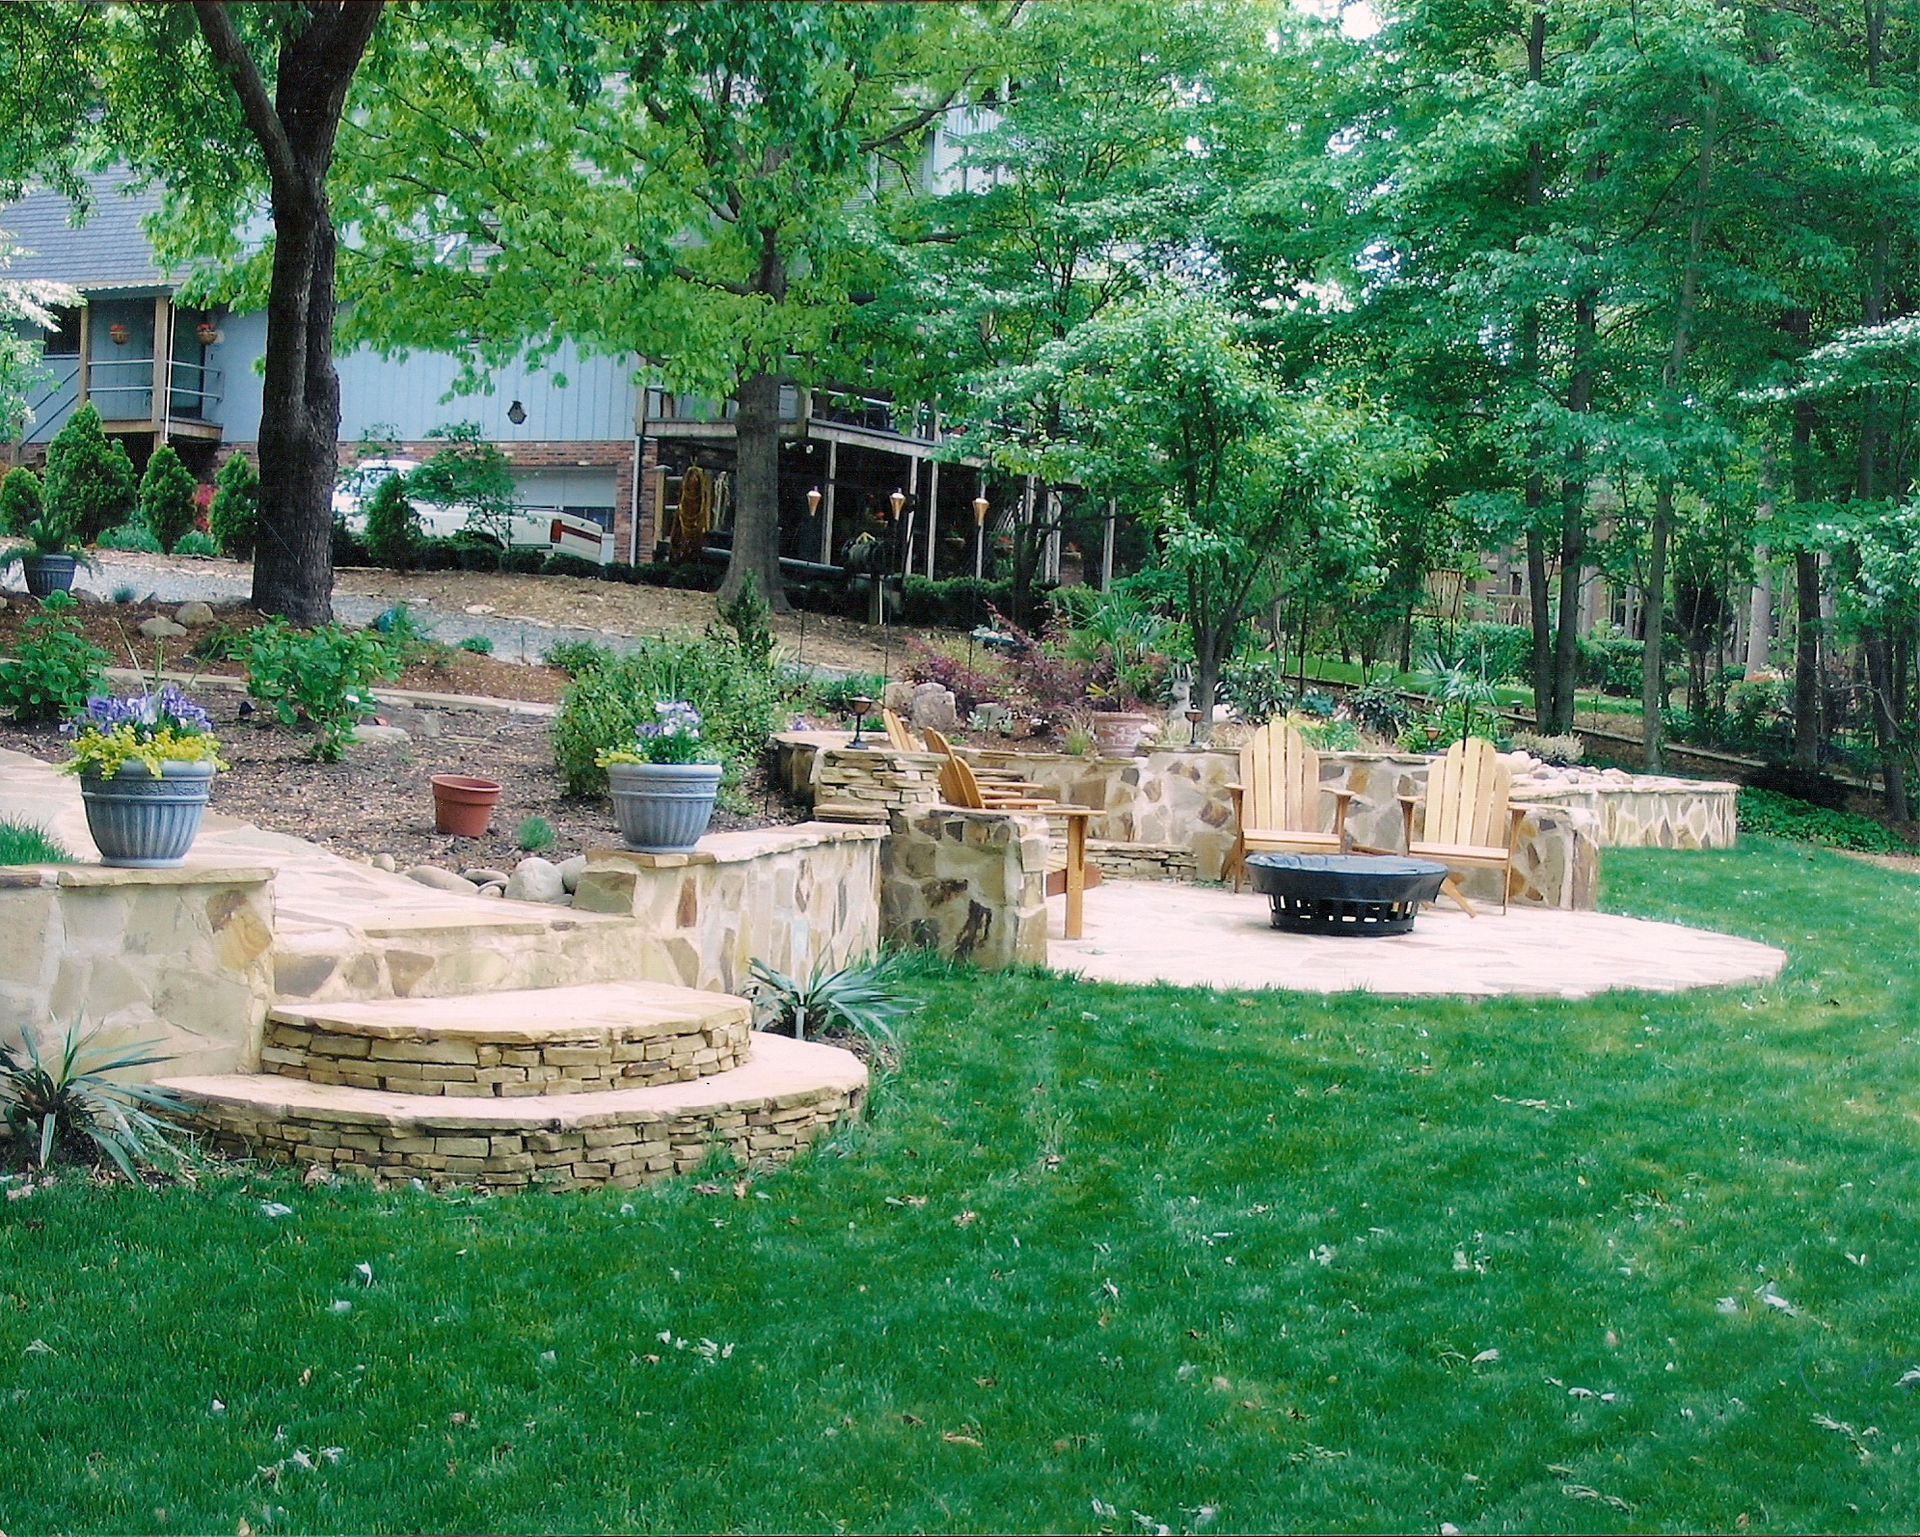 A lush green lawn with a fire pit in the middle